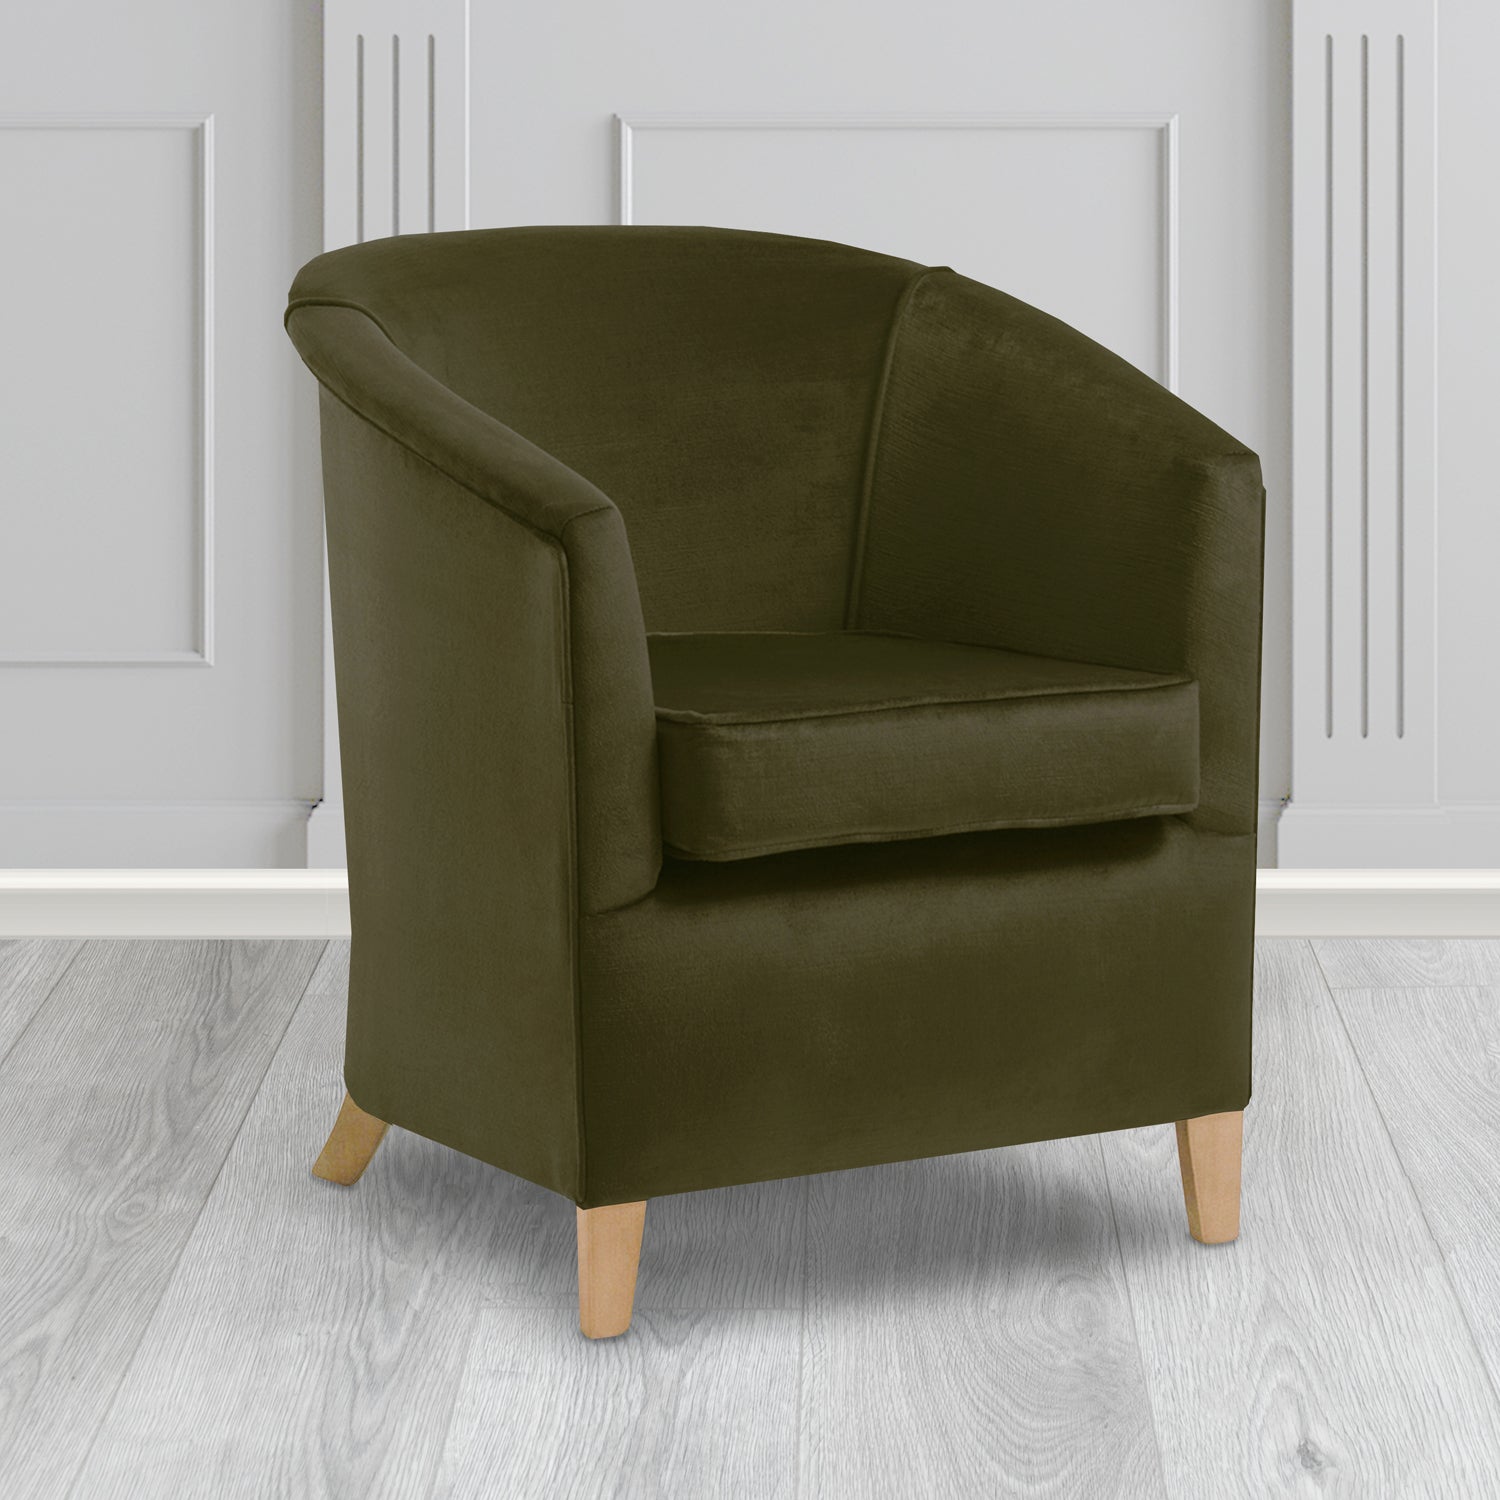 Jasmine Tub Chair in Noble 204 Moss Crib 5 Velvet Fabric - Water Resistant - The Tub Chair Shop